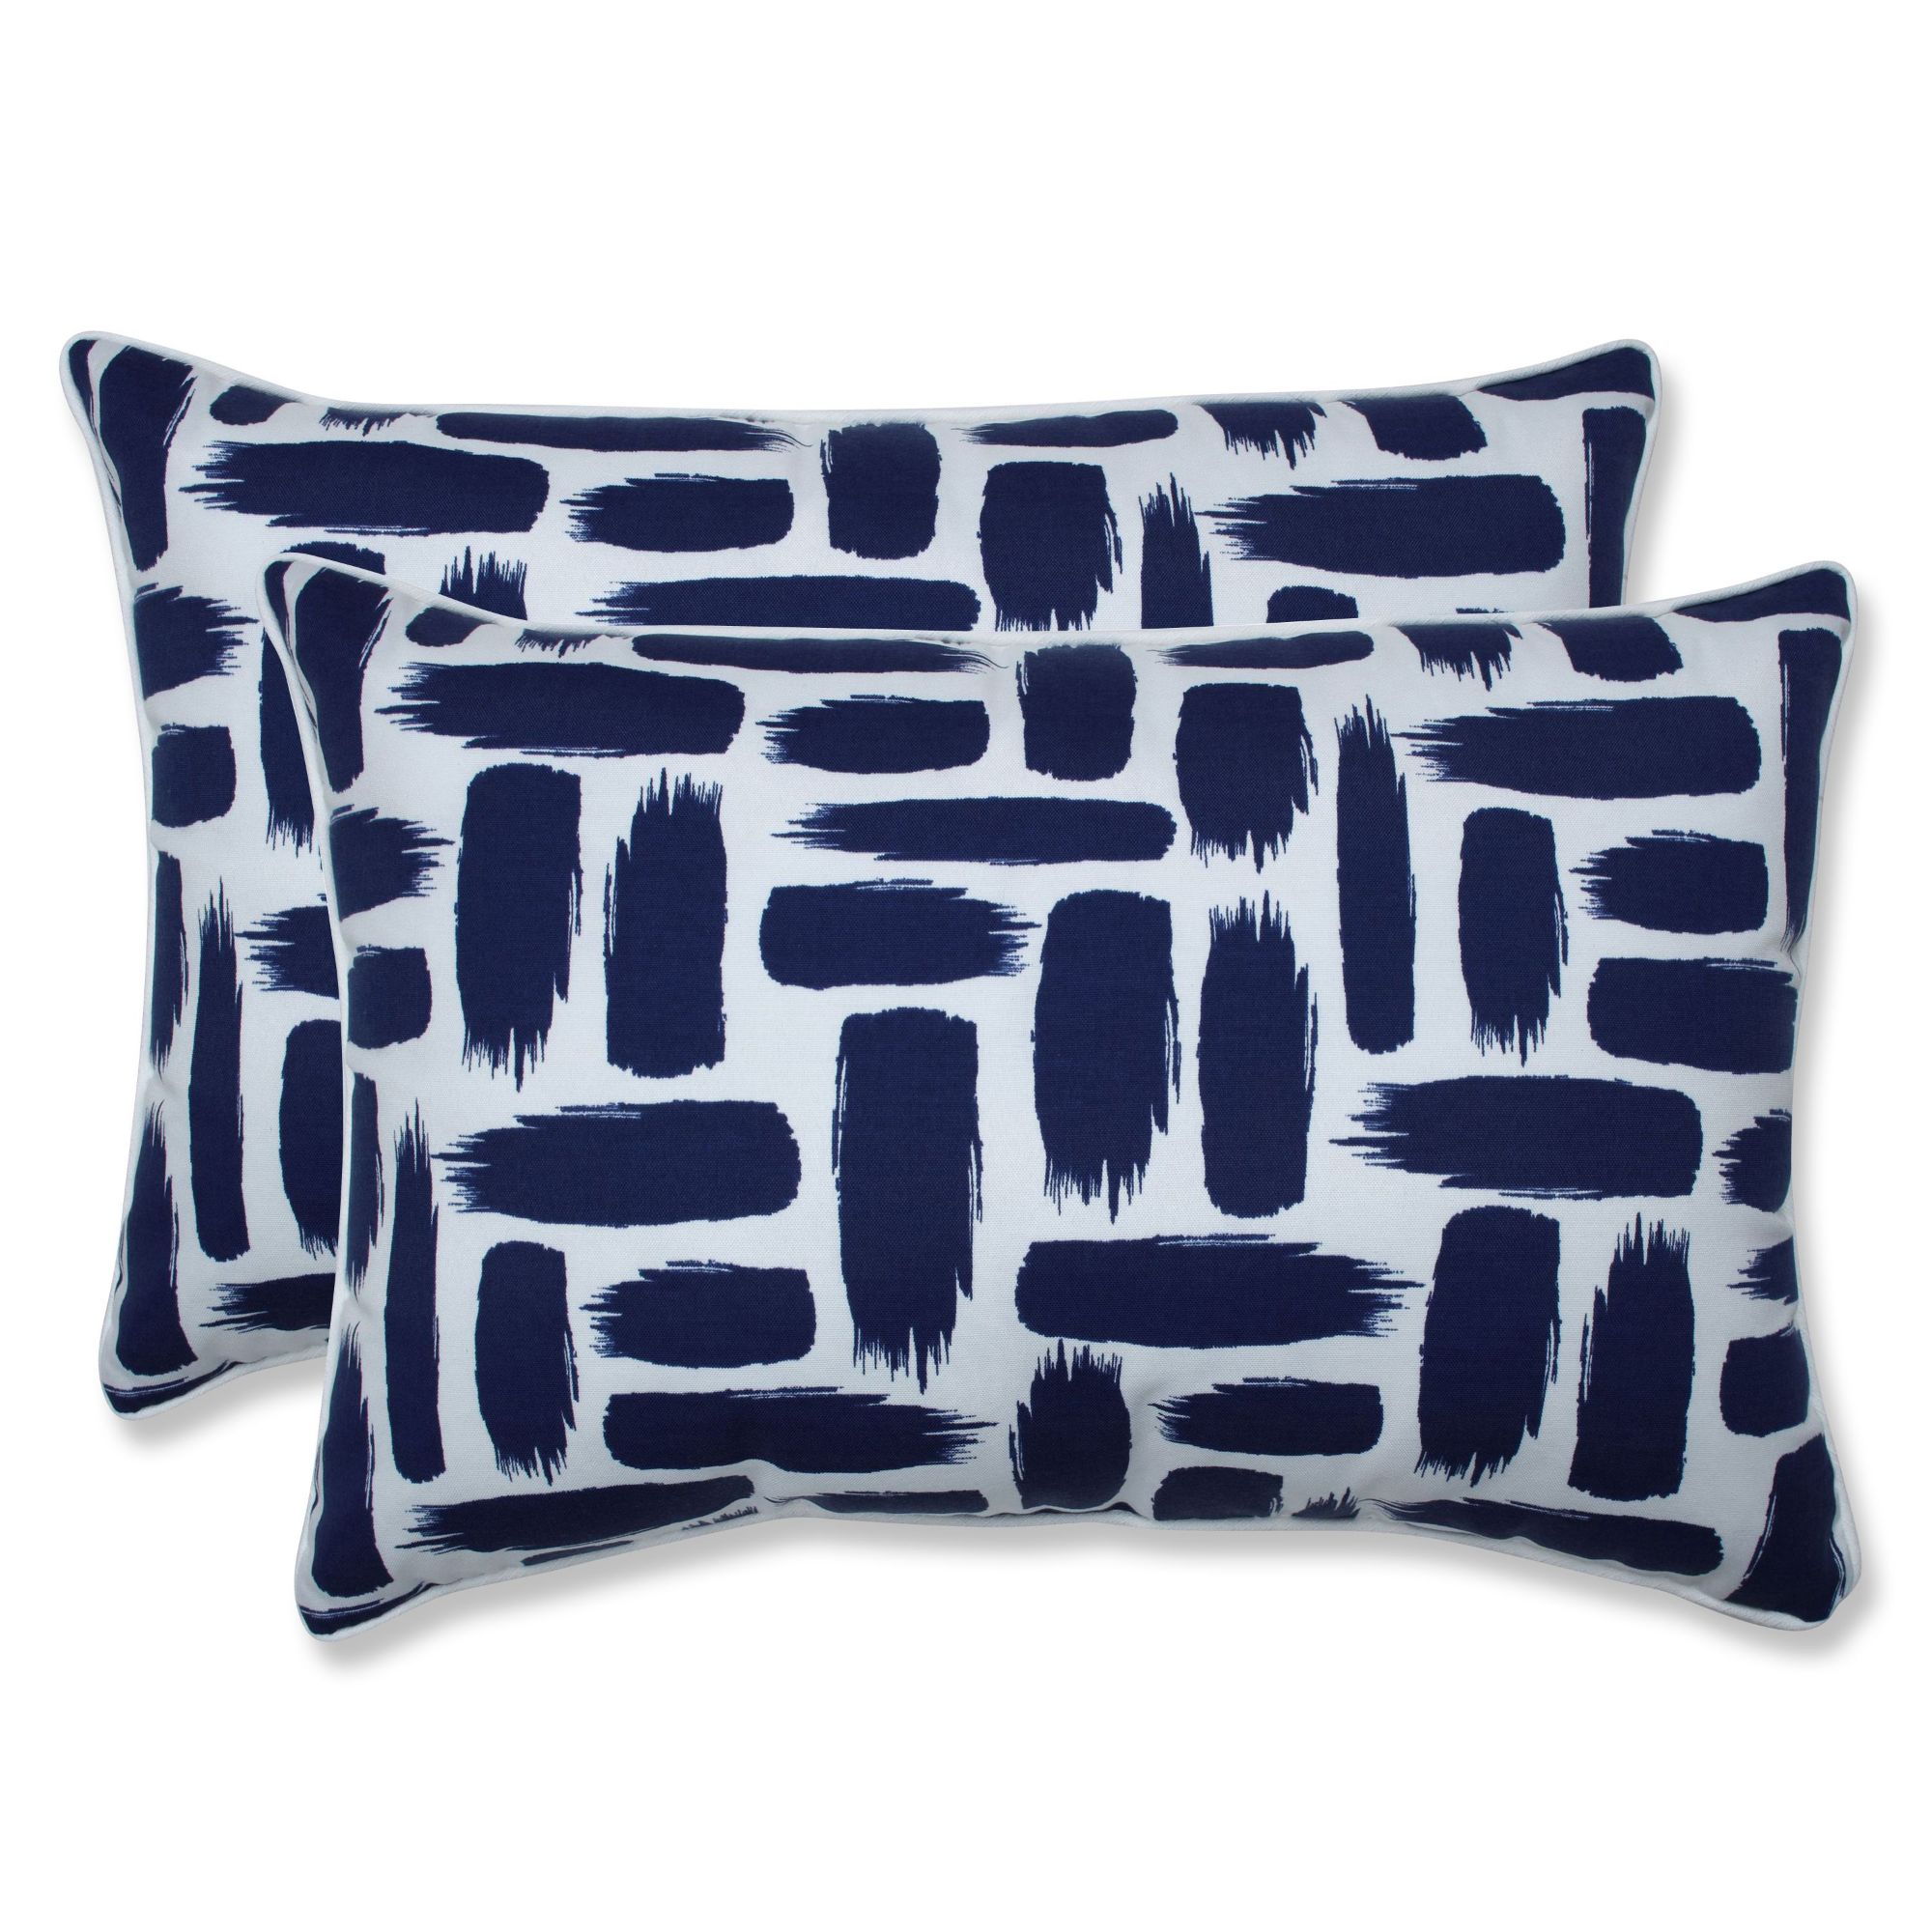 CC Home Furnishings Set of 2 Navy Blue and White Paint Stokes UV Resistant Patio Rectangular Throw Pillows 24.5"